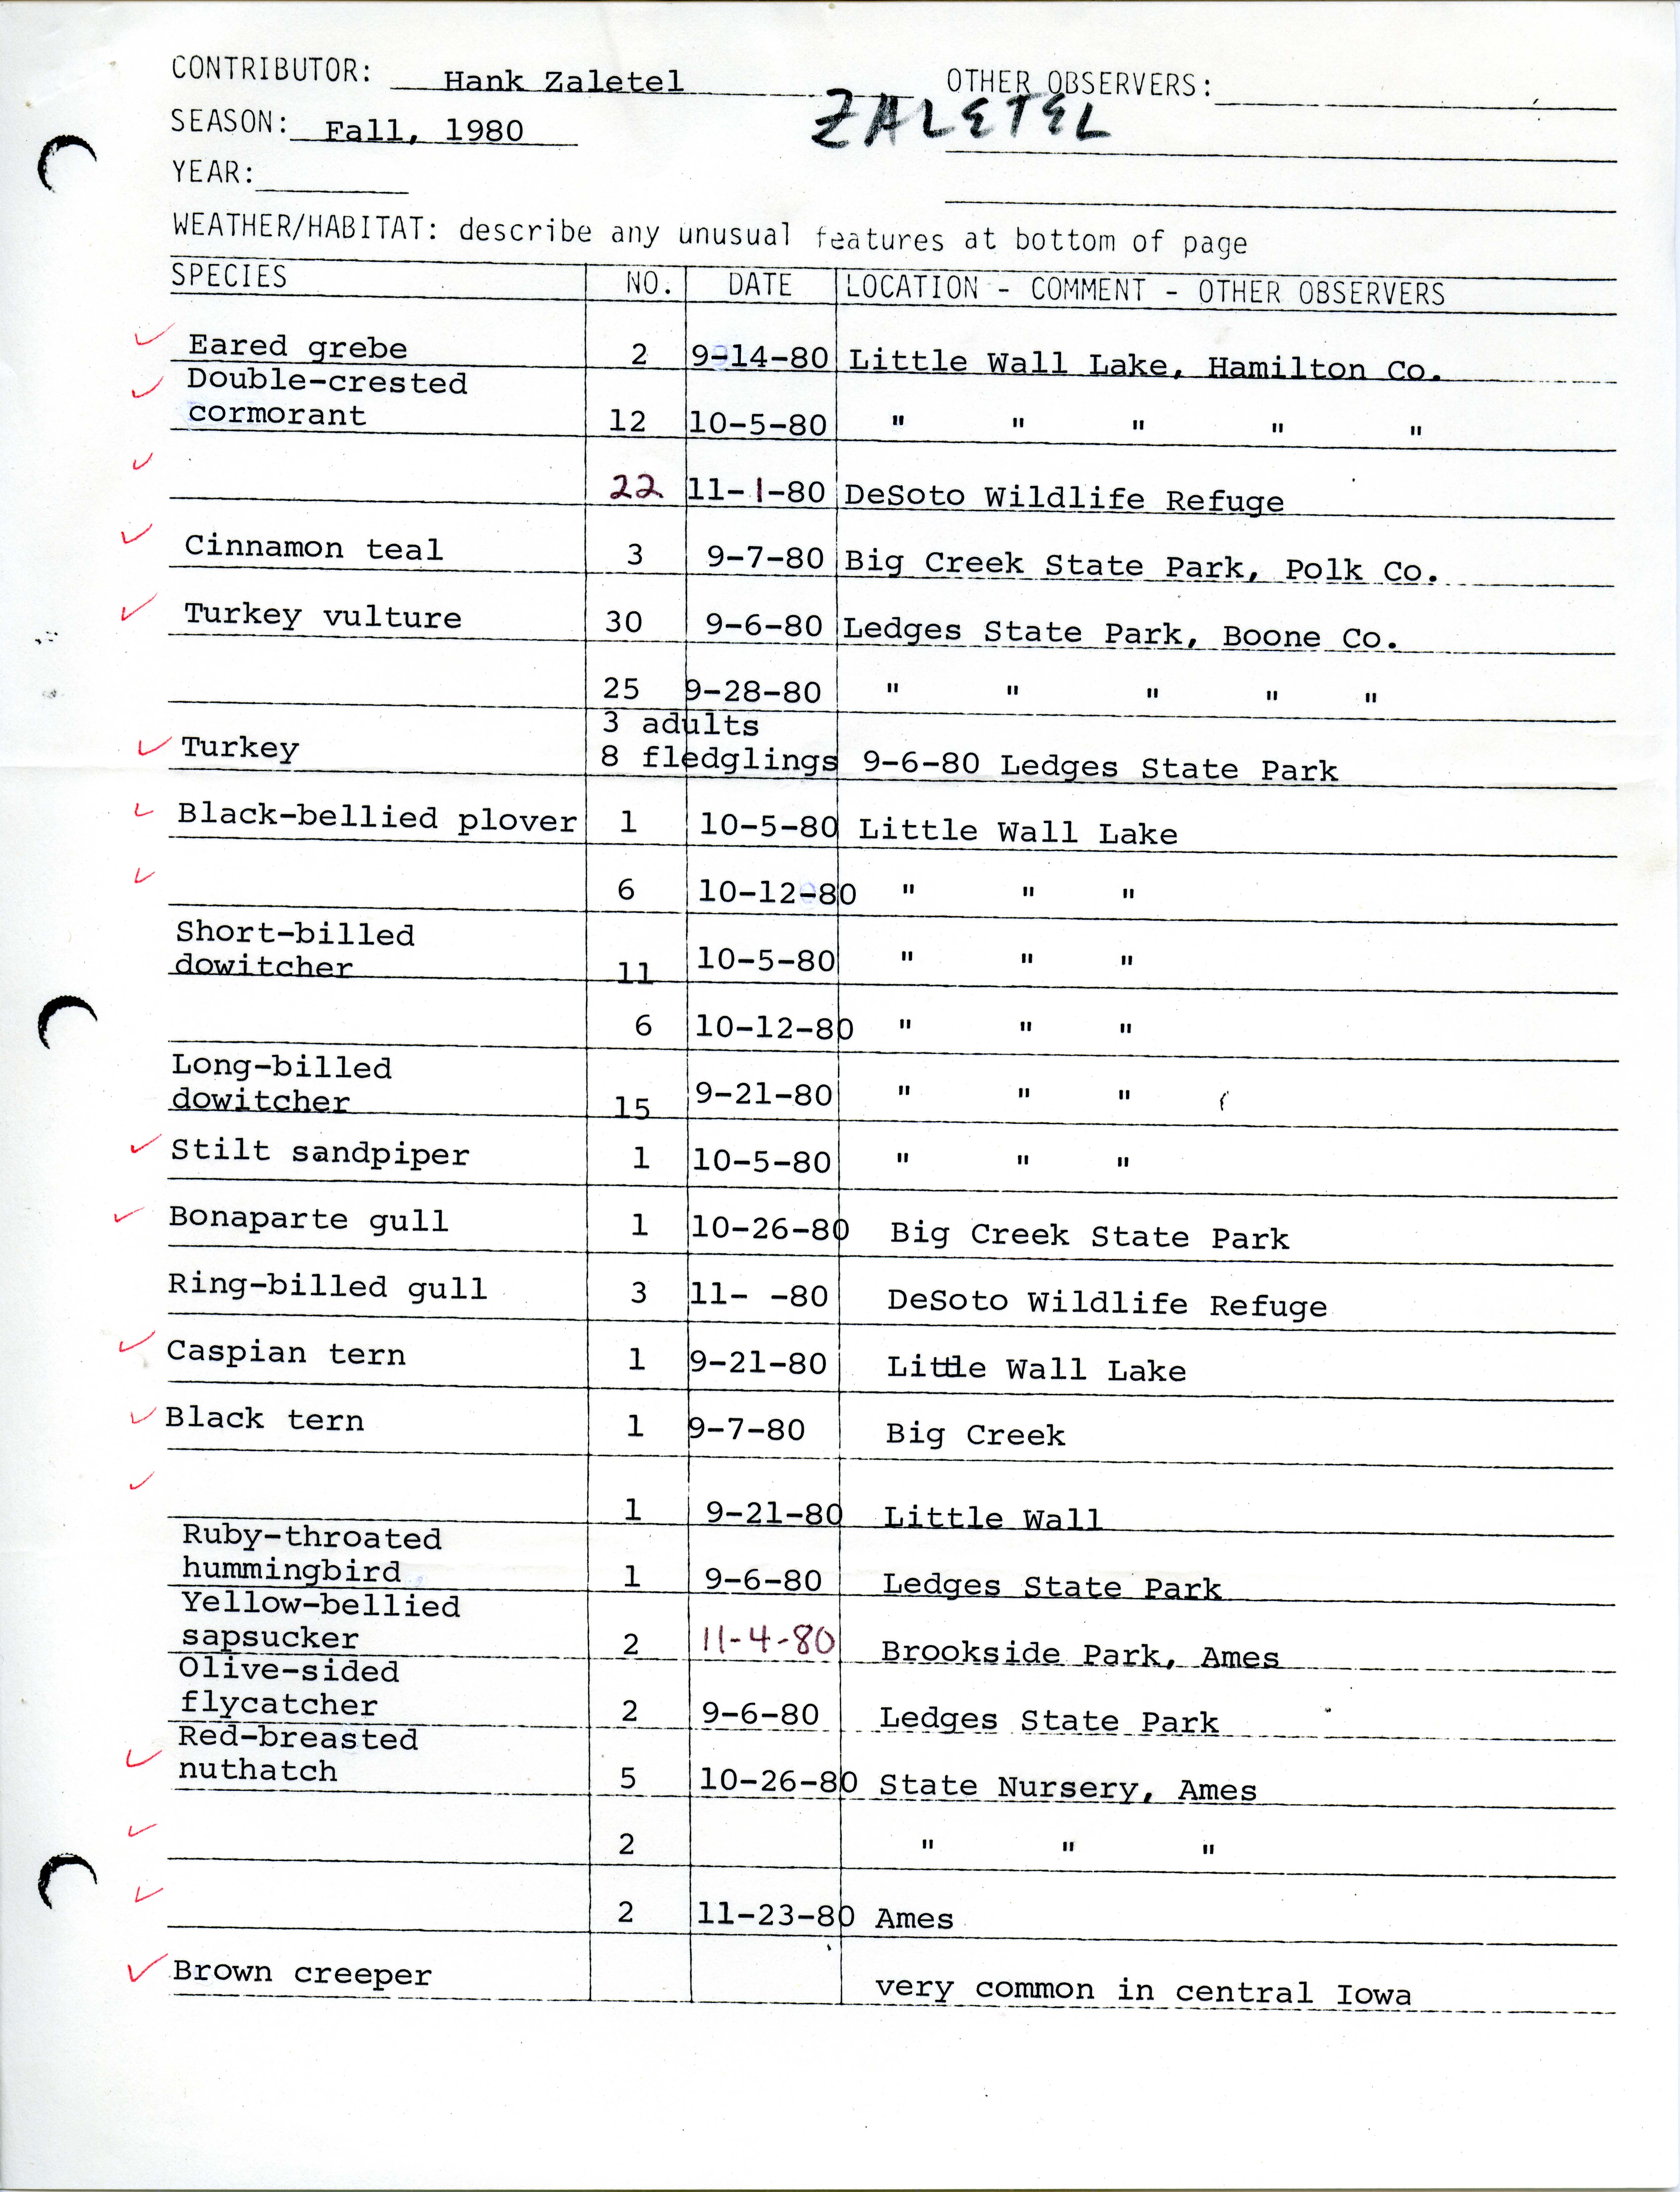 Annotated bird sighting list for Fall 1980 compiled by Hank Zaletel